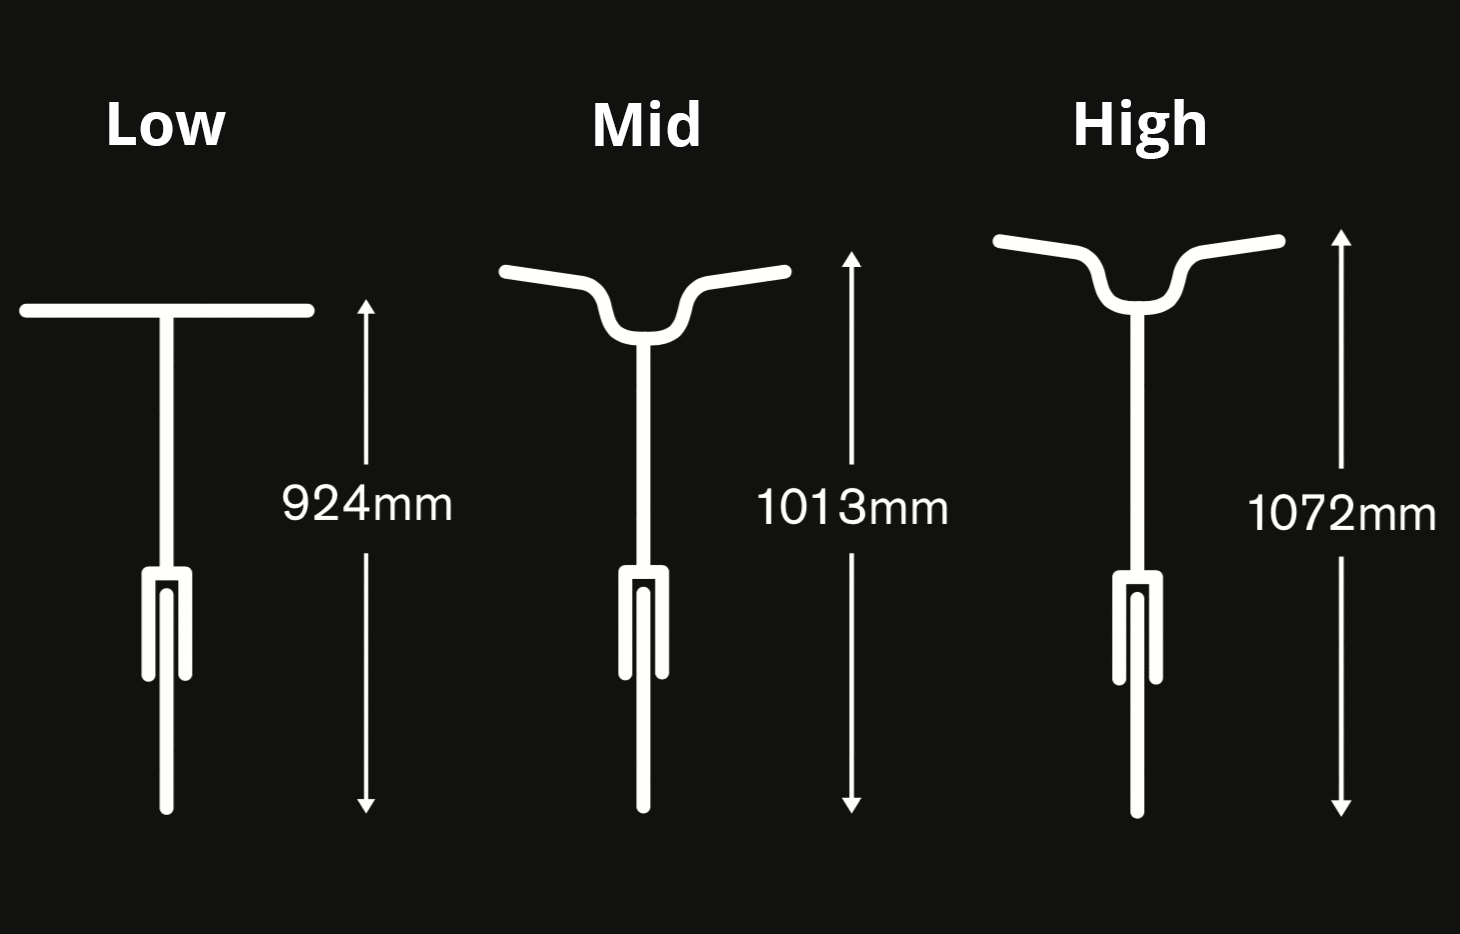 The three Brompton handlebars and their heights